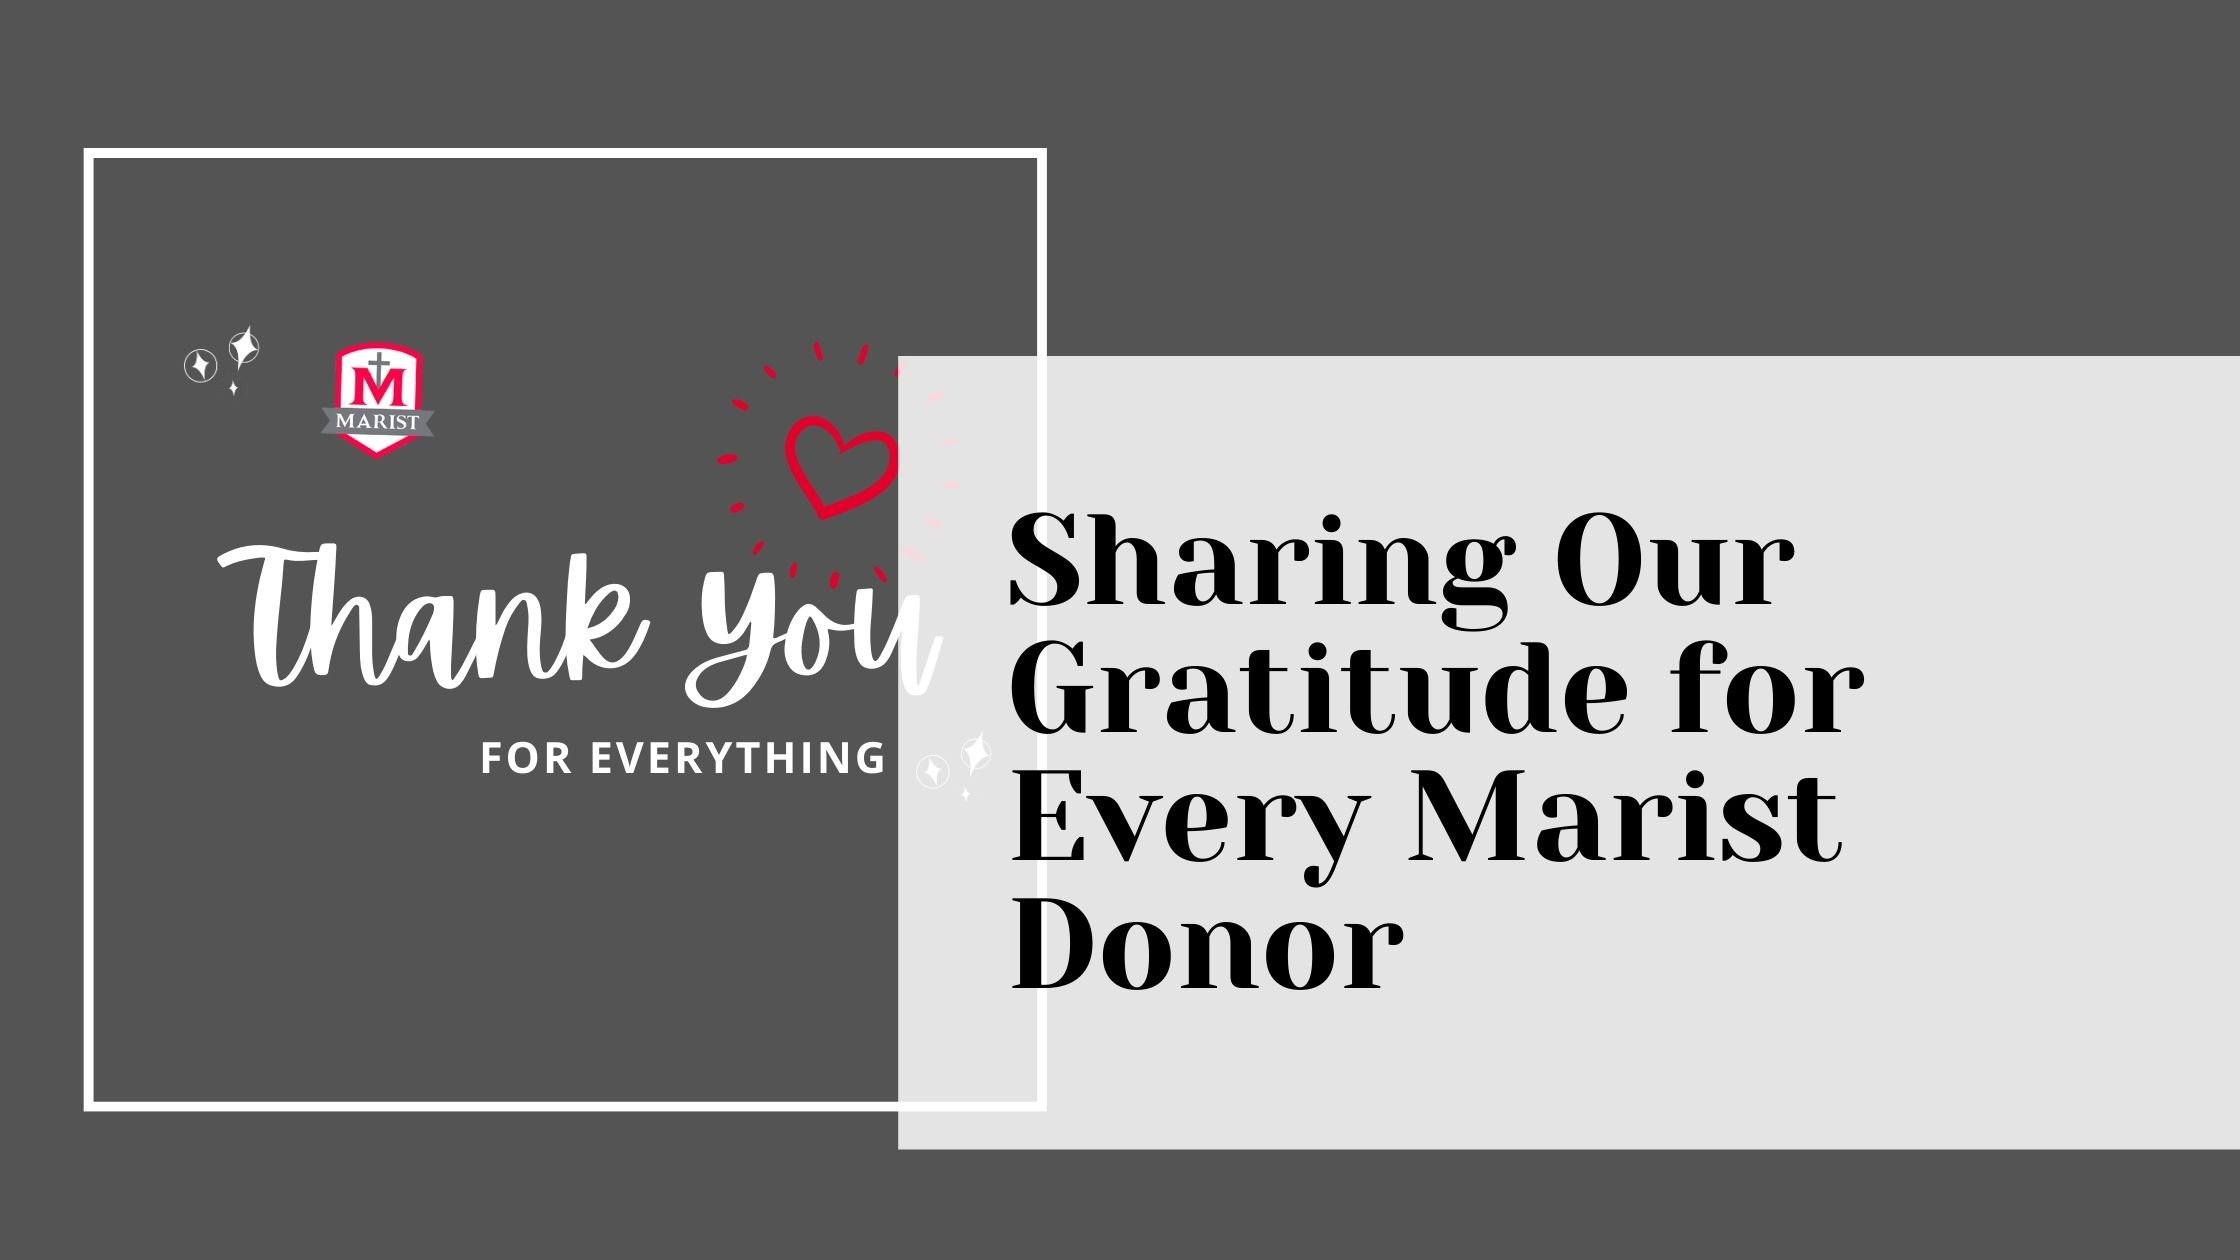 Sharing Our Gratitude for Every Marist Donor